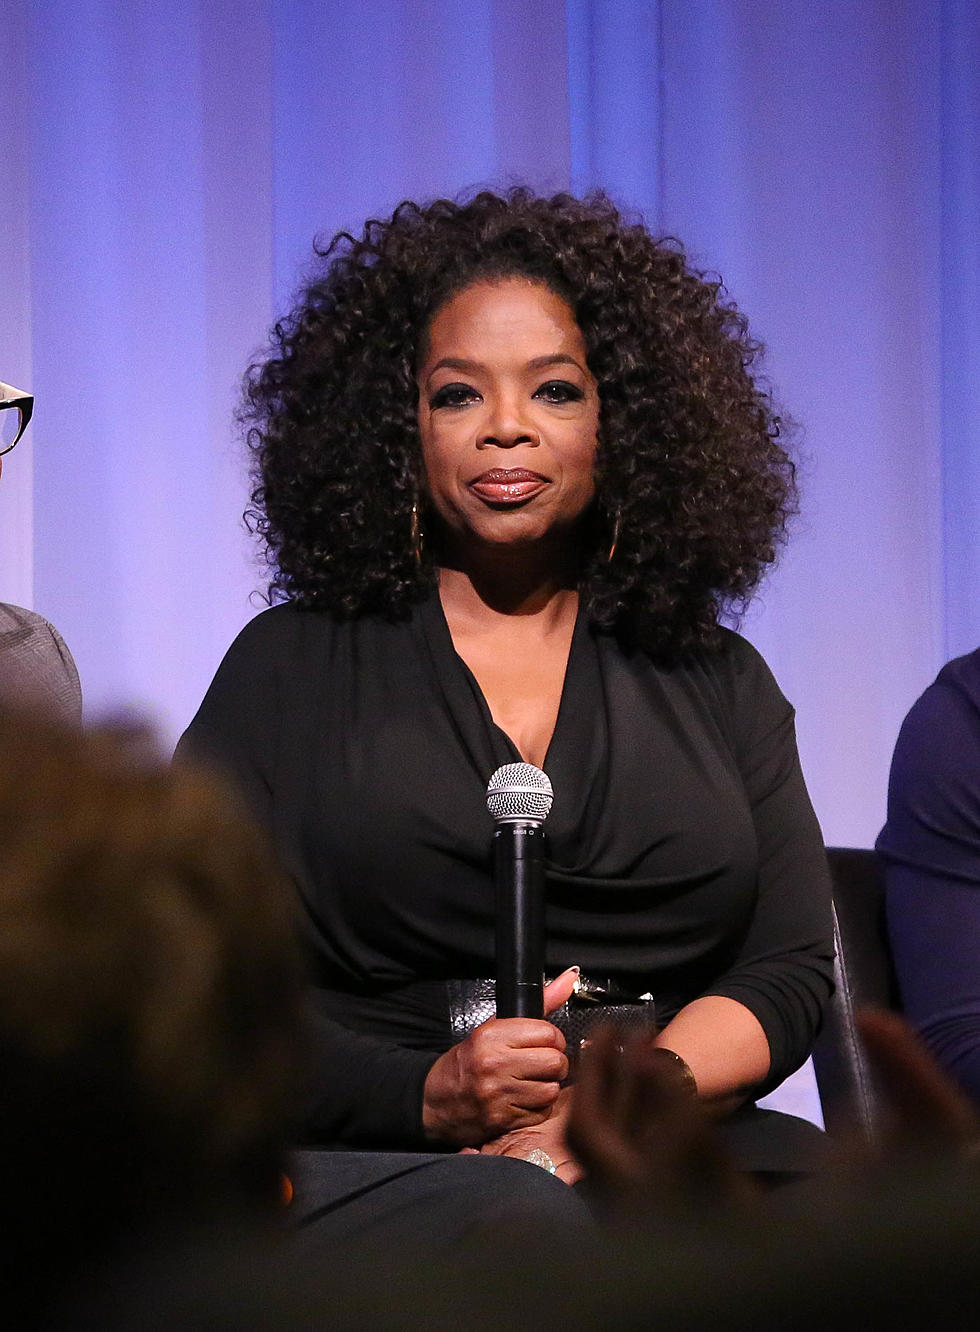 Here’s An Oprah Moment You’ll Love